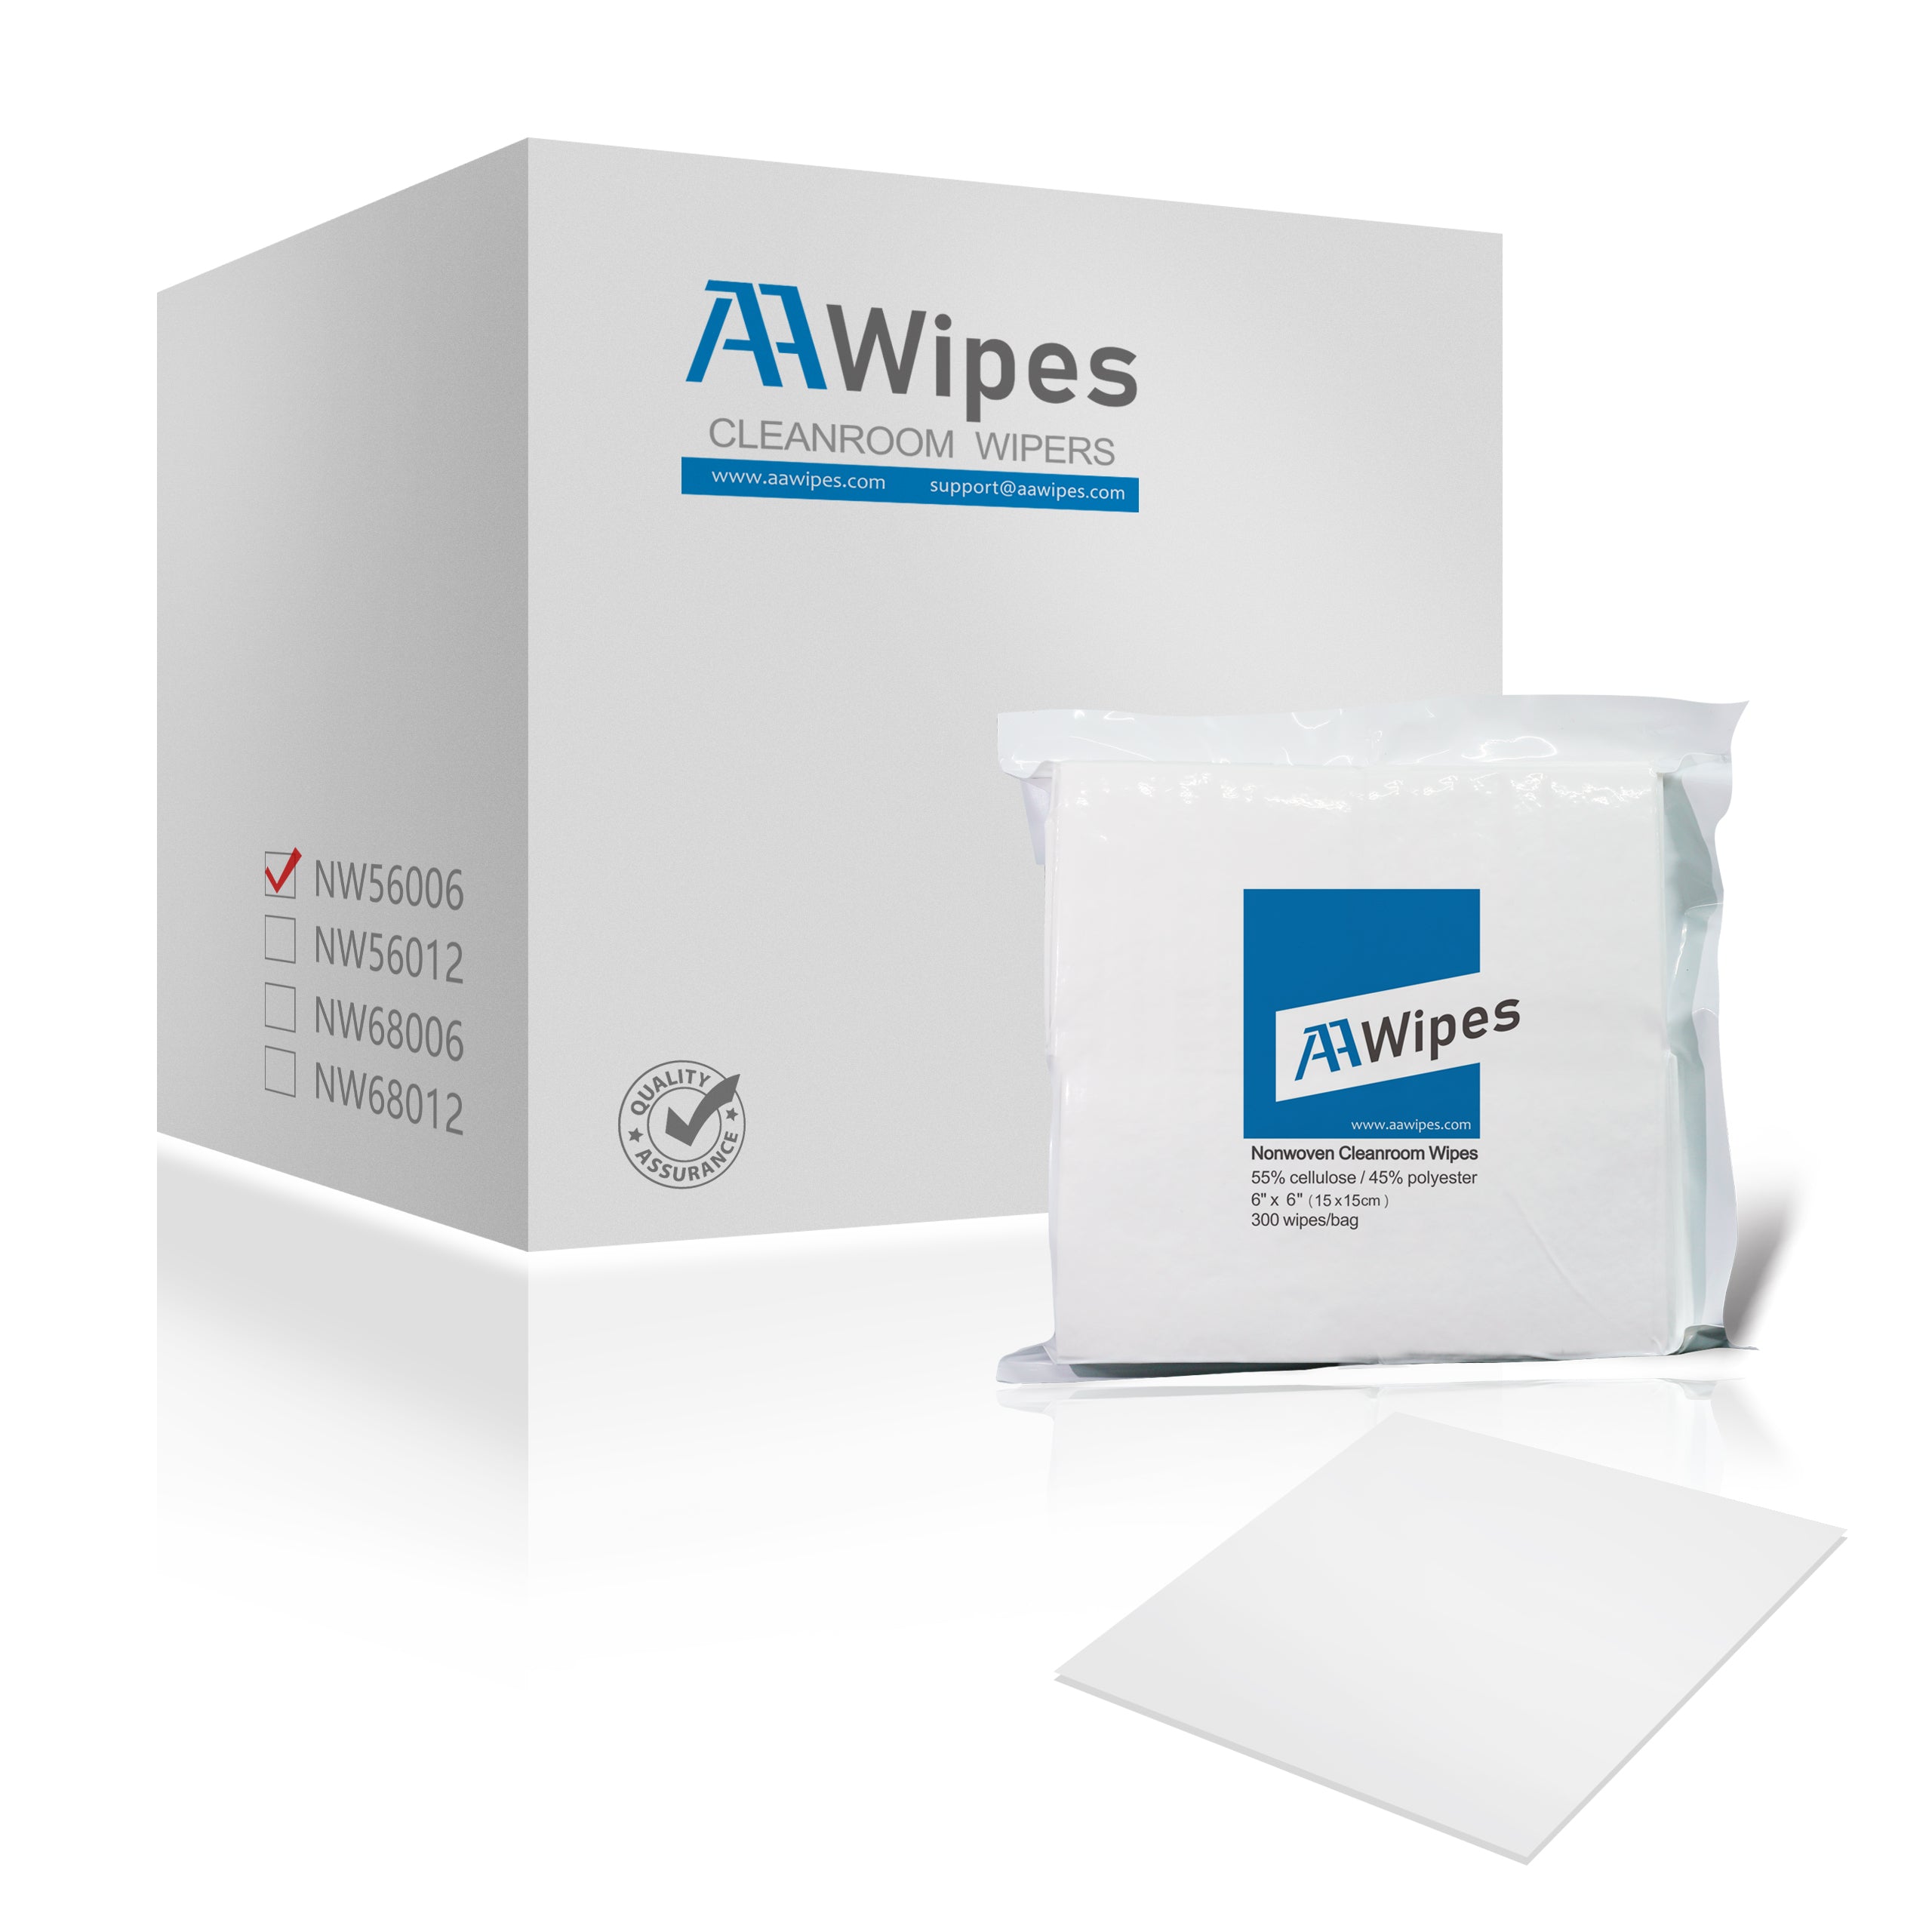 Cleanroom Wipes Cellulose/Polyester, Cleanroom Consumables Lint-free 6" x 6" Nonwoven Wipers (30,000 Wipes/100 Bags/Case) (56 gsm) (No. NW05606)